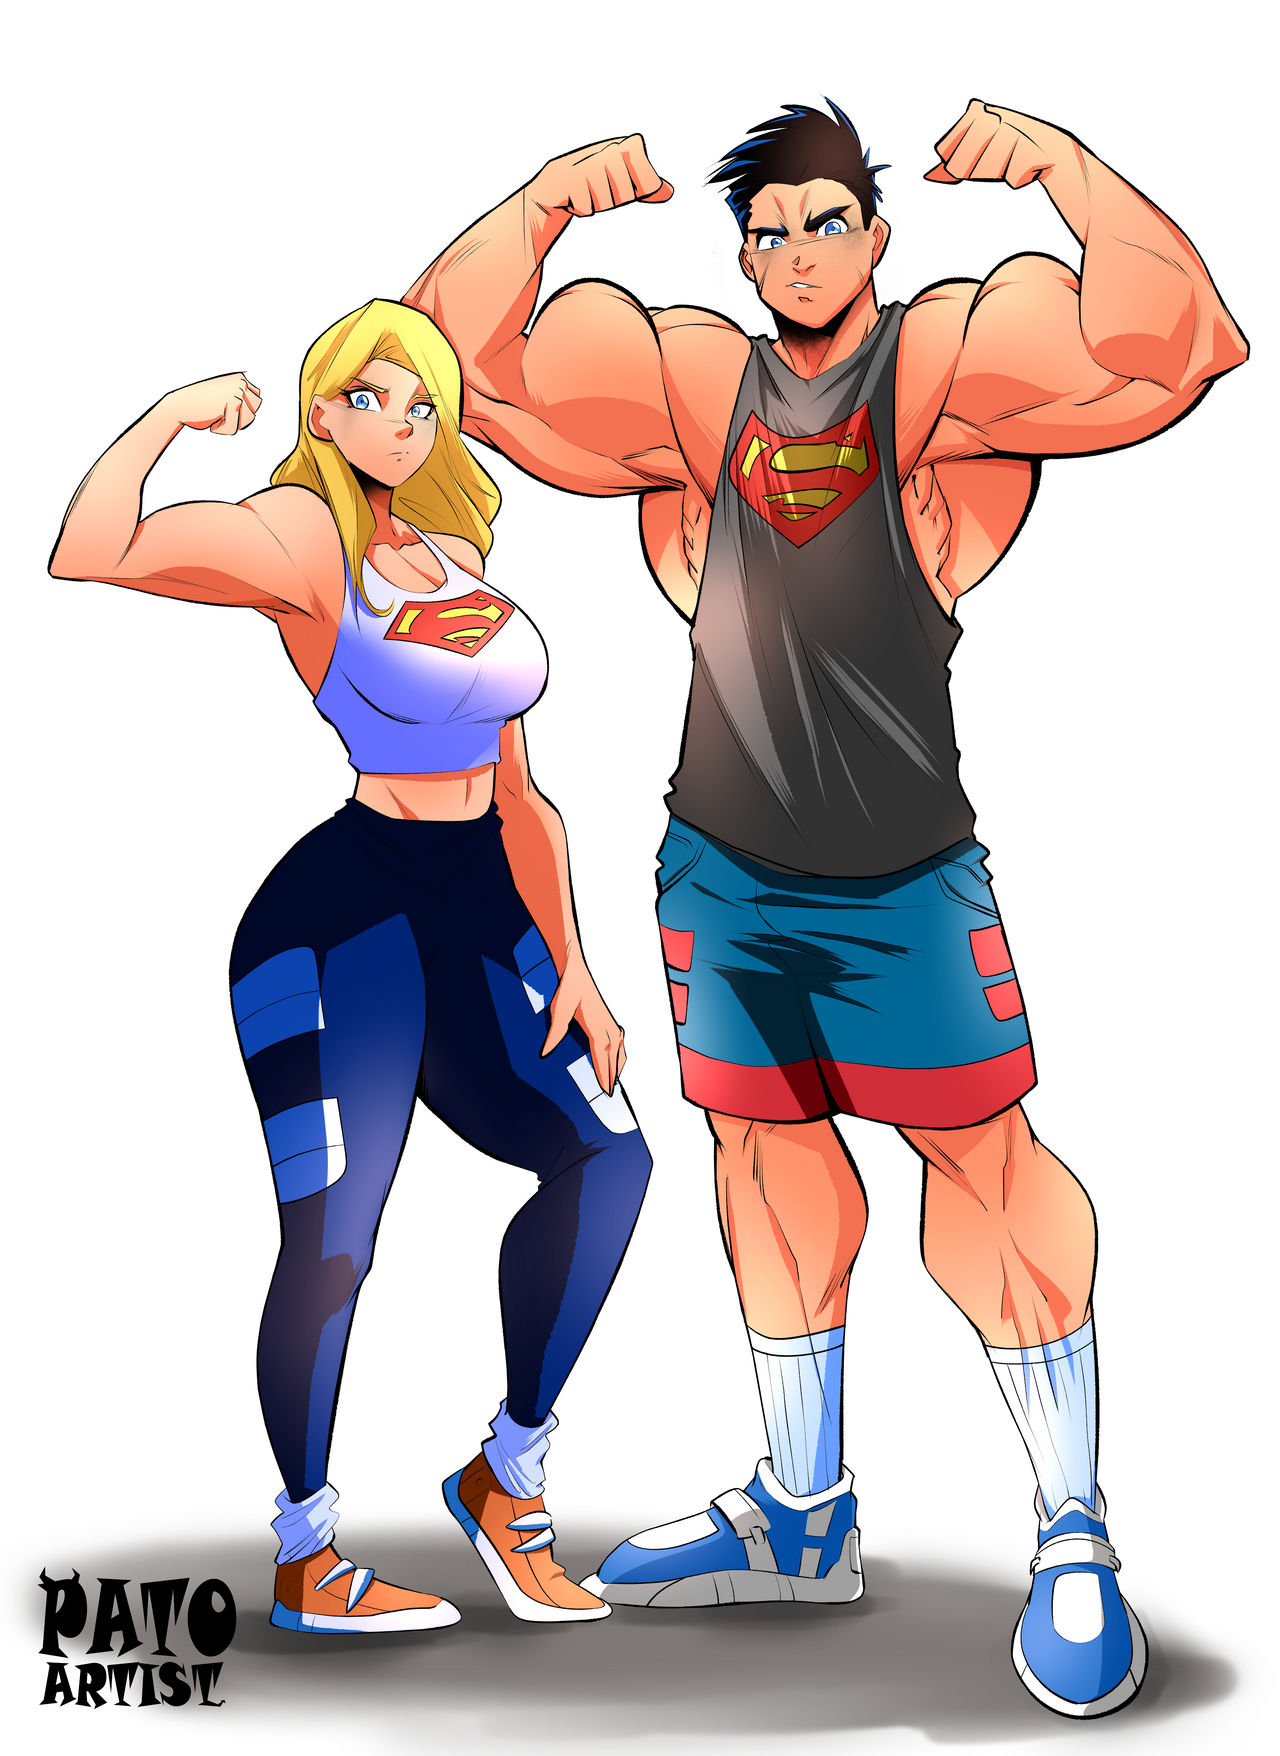 superboy_and_supergirl__dc__by_patoartist_dft2fro-fullview.jpg